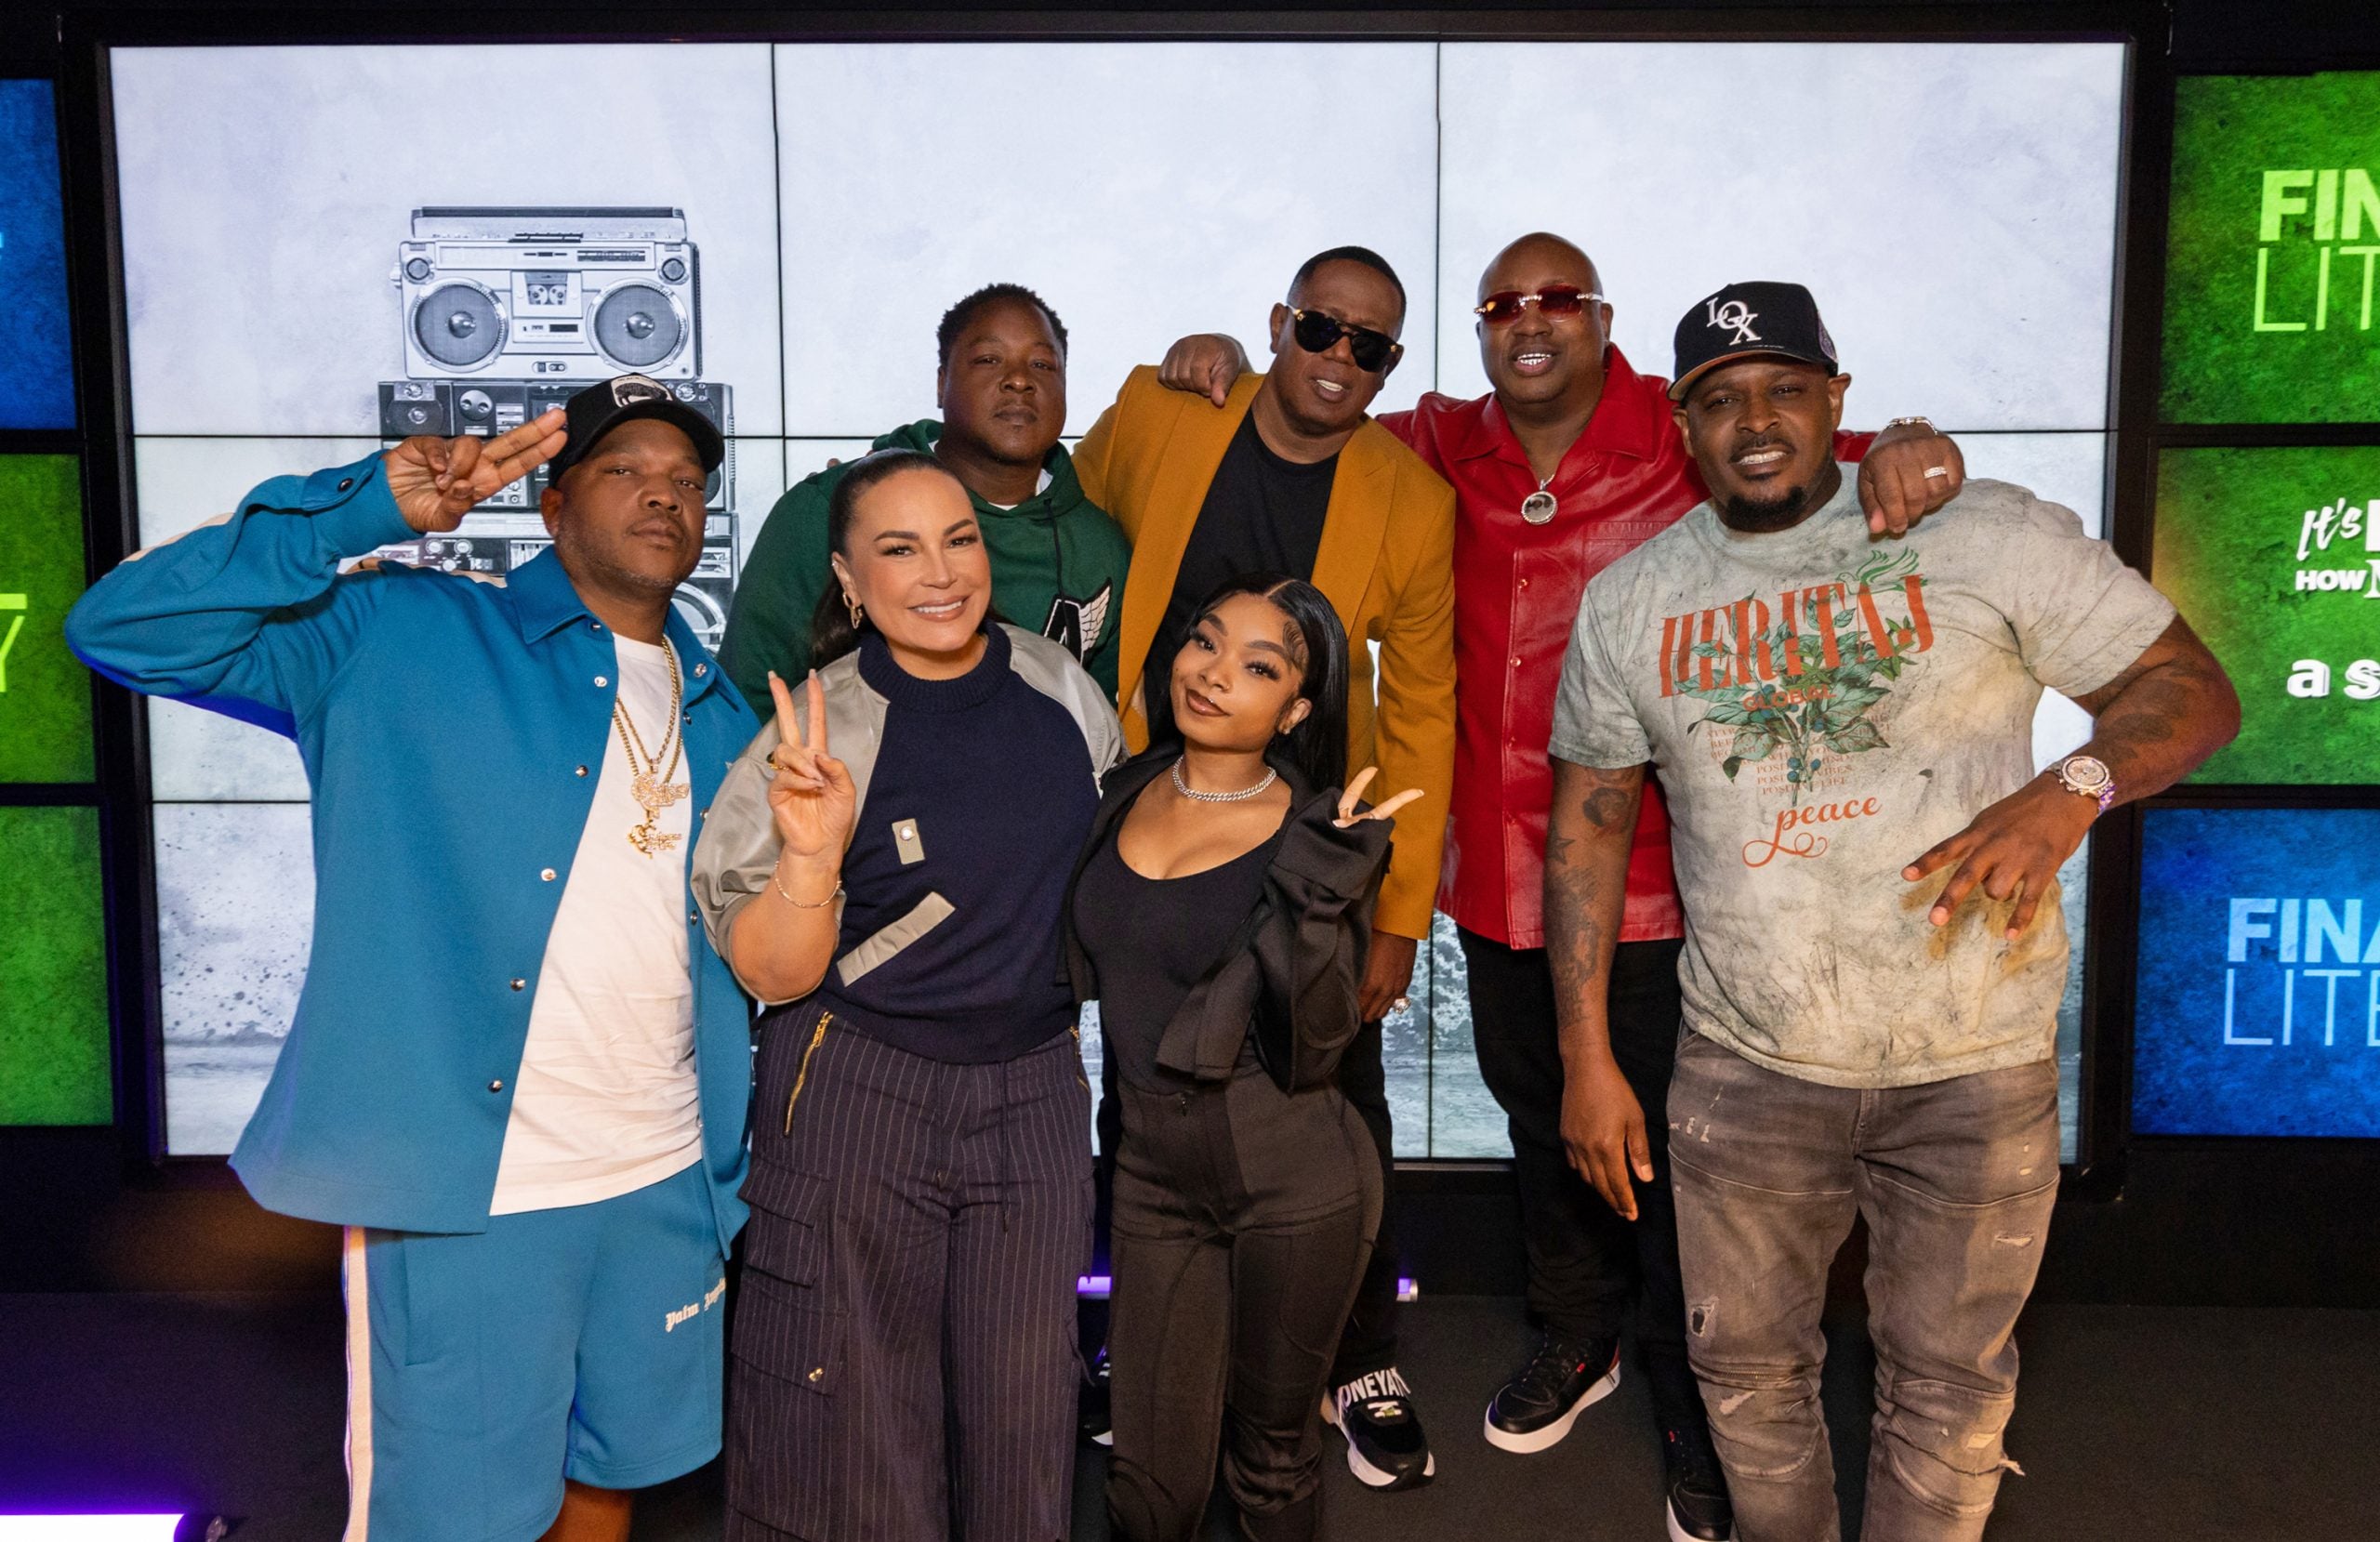 ABC News Studios Honors Black Music Month With ‘Hip-Hop @ 50: Rhythms, Rhymes & Reflections’